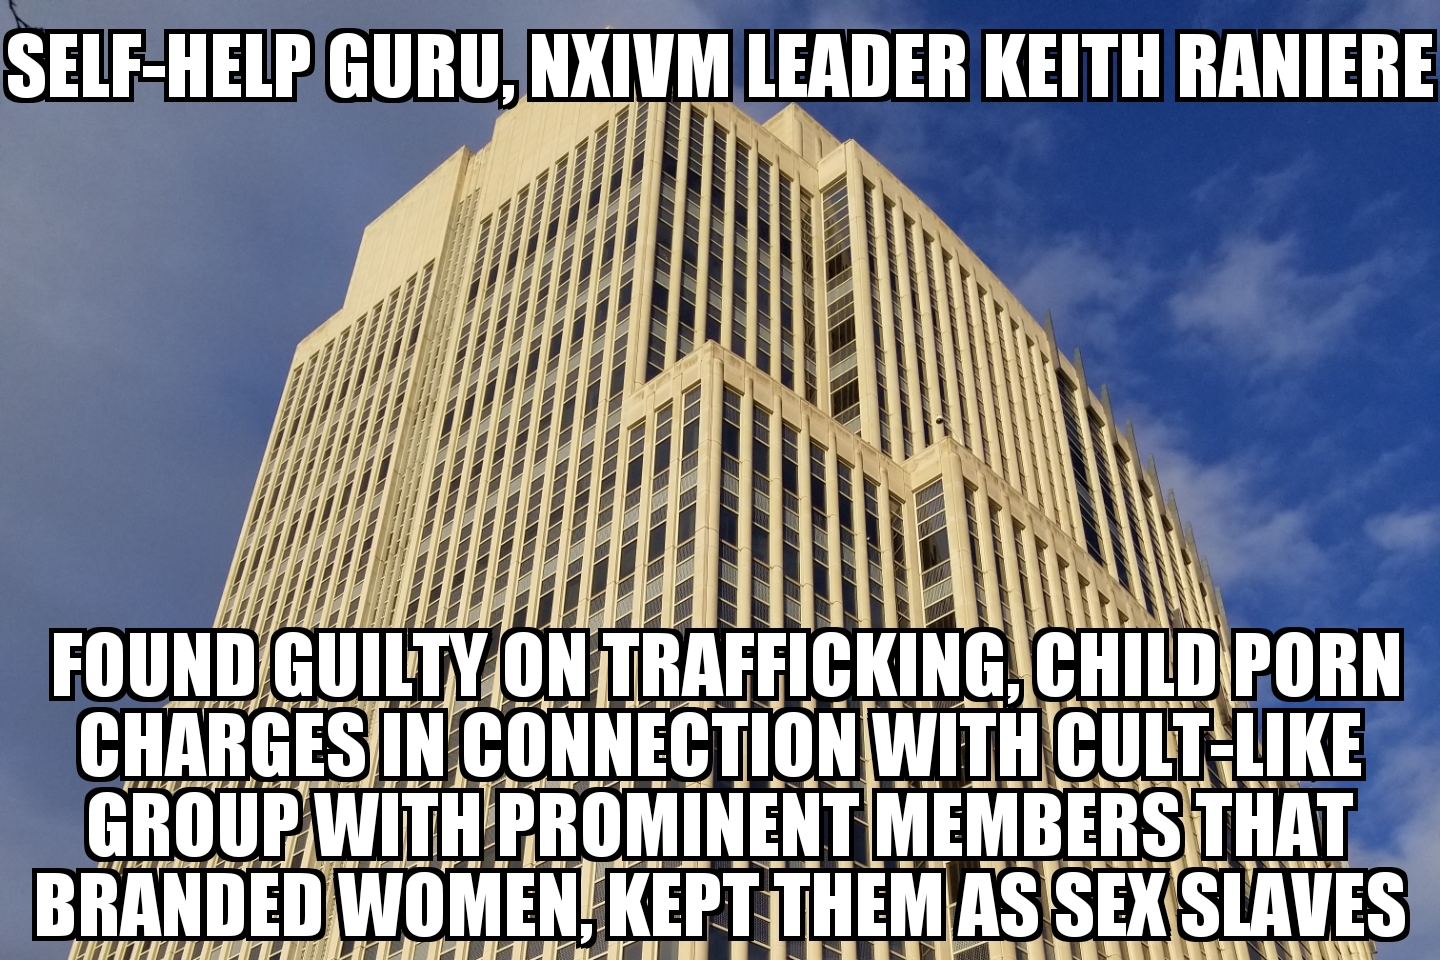 NXIVM leader Keith Raniere guilty on all charges